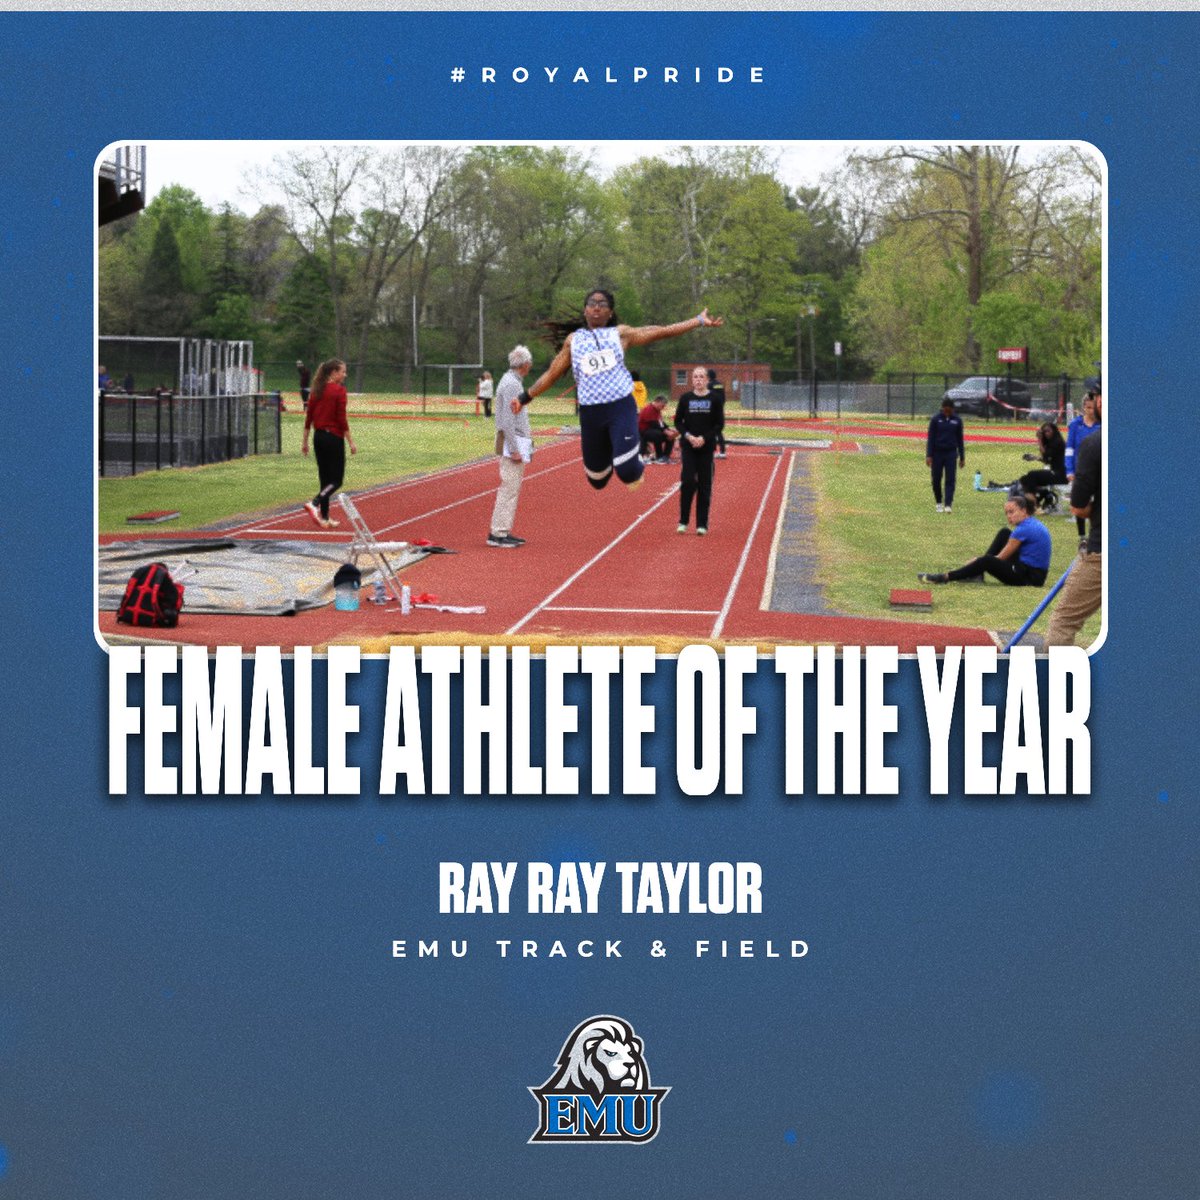 One more big 𝐂𝐎𝐍𝐆𝐑𝐀𝐓𝐔𝐋𝐀𝐓𝐈𝐎𝐍𝐒 to our two Royals Athletes of the Year: Ray Ray Taylor and Bellamy Immanuel! 🏆🏆 📰: tinyurl.com/yckxz425 #RoyalPride | #CompeteTogether